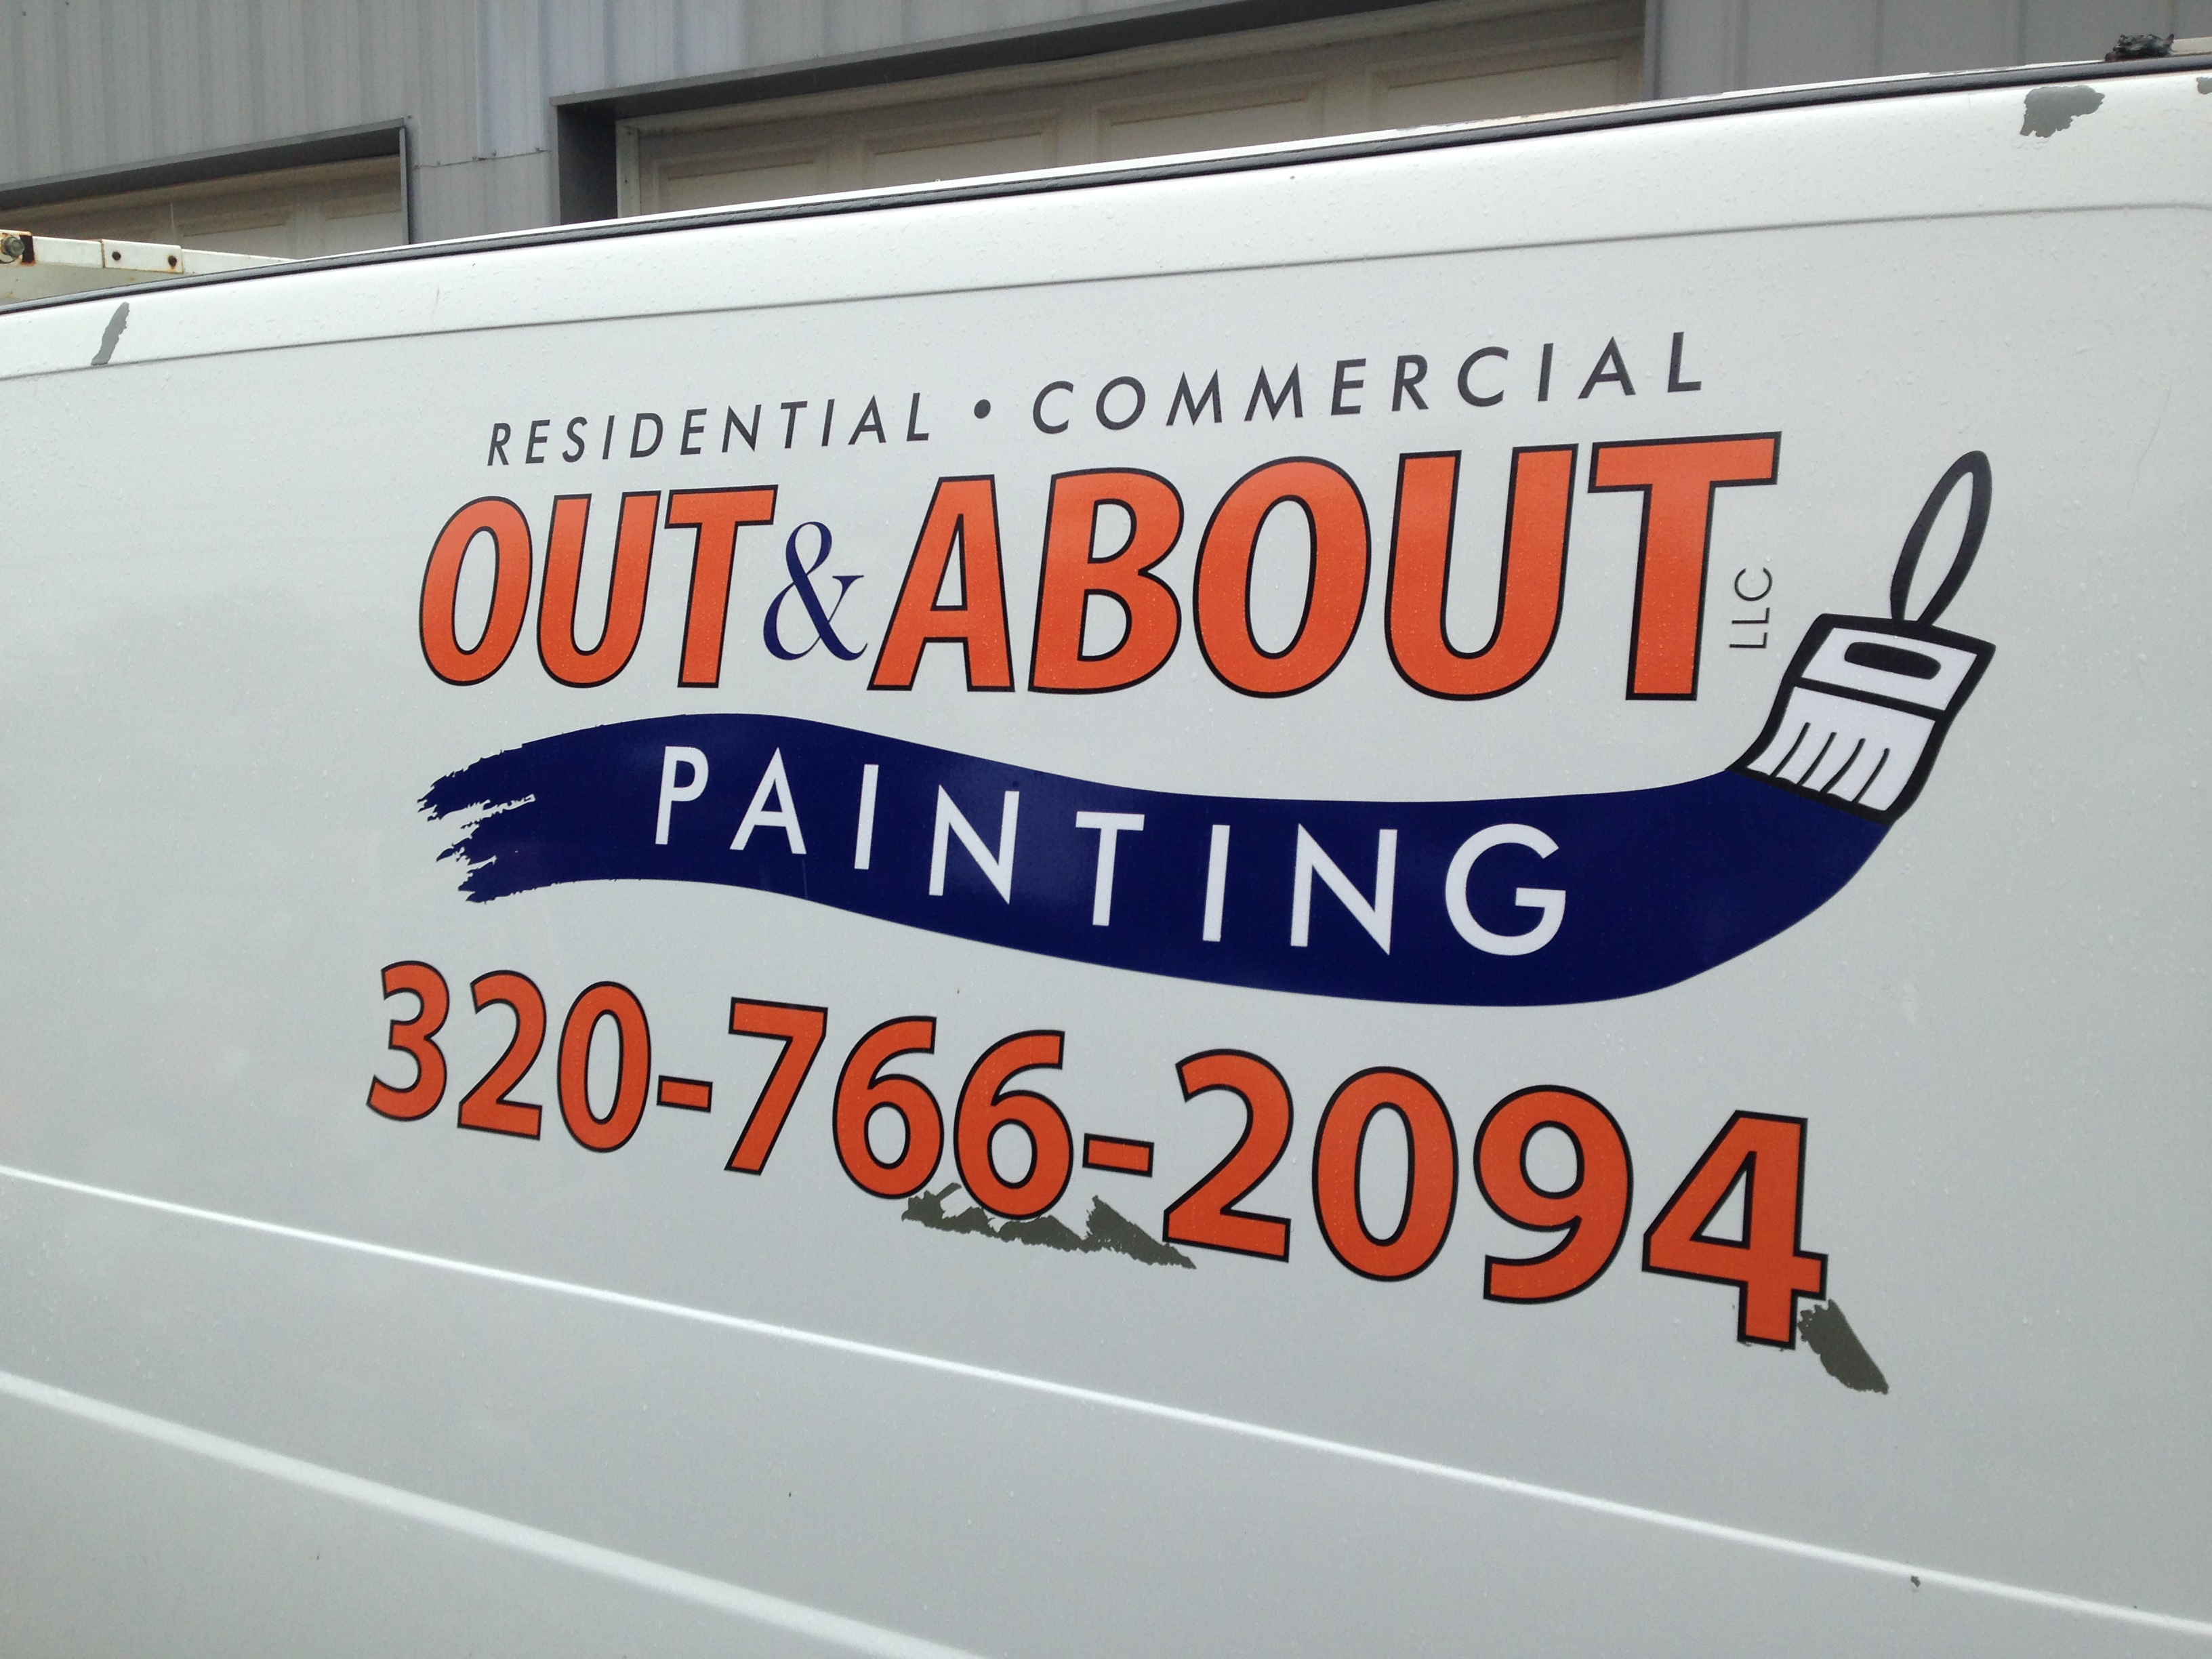 Custom Signage for Out & About Painting | Signmax.com